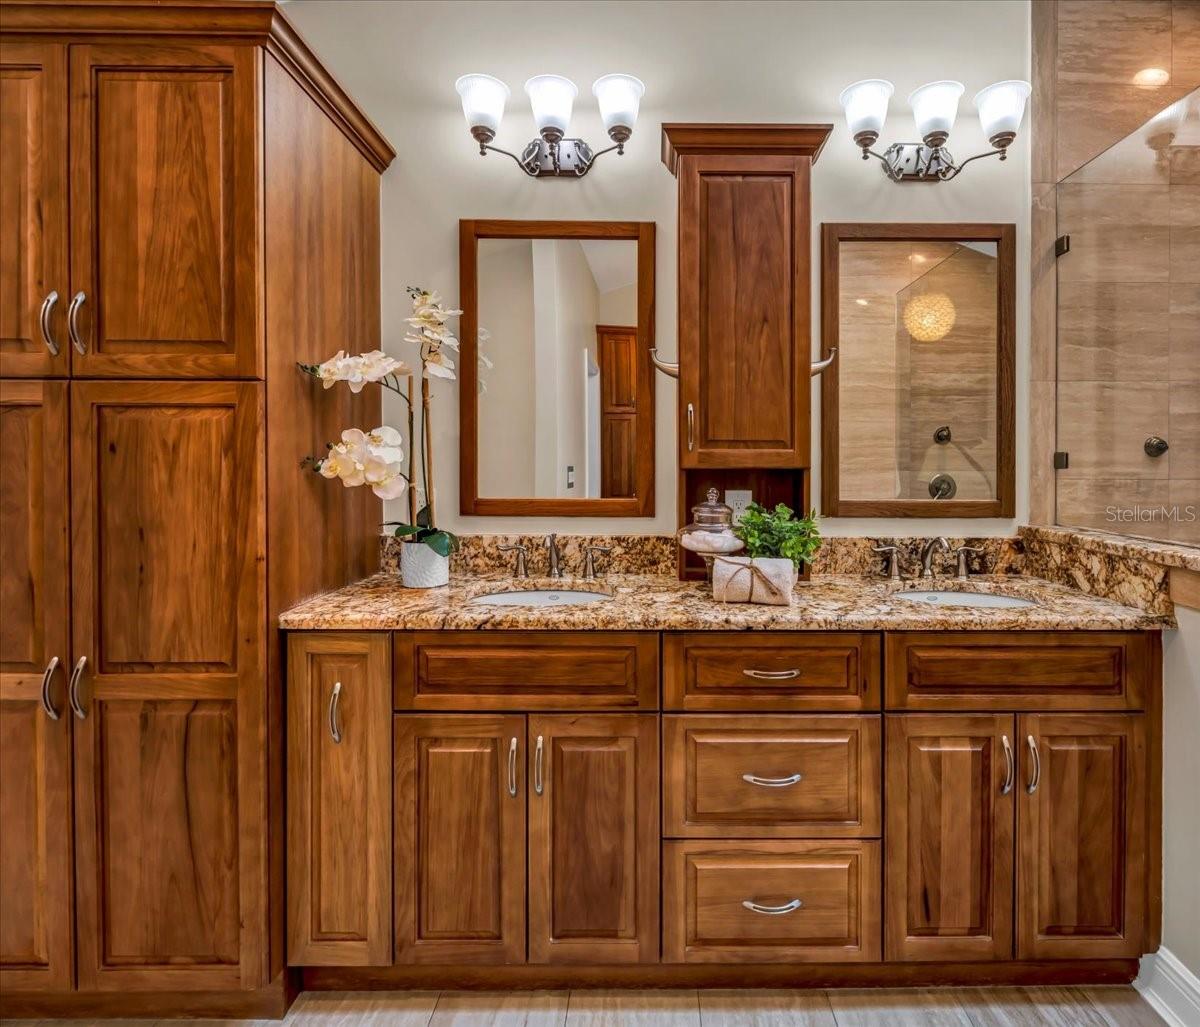 Dual sink vanity and plenty of cabinetry for your linens